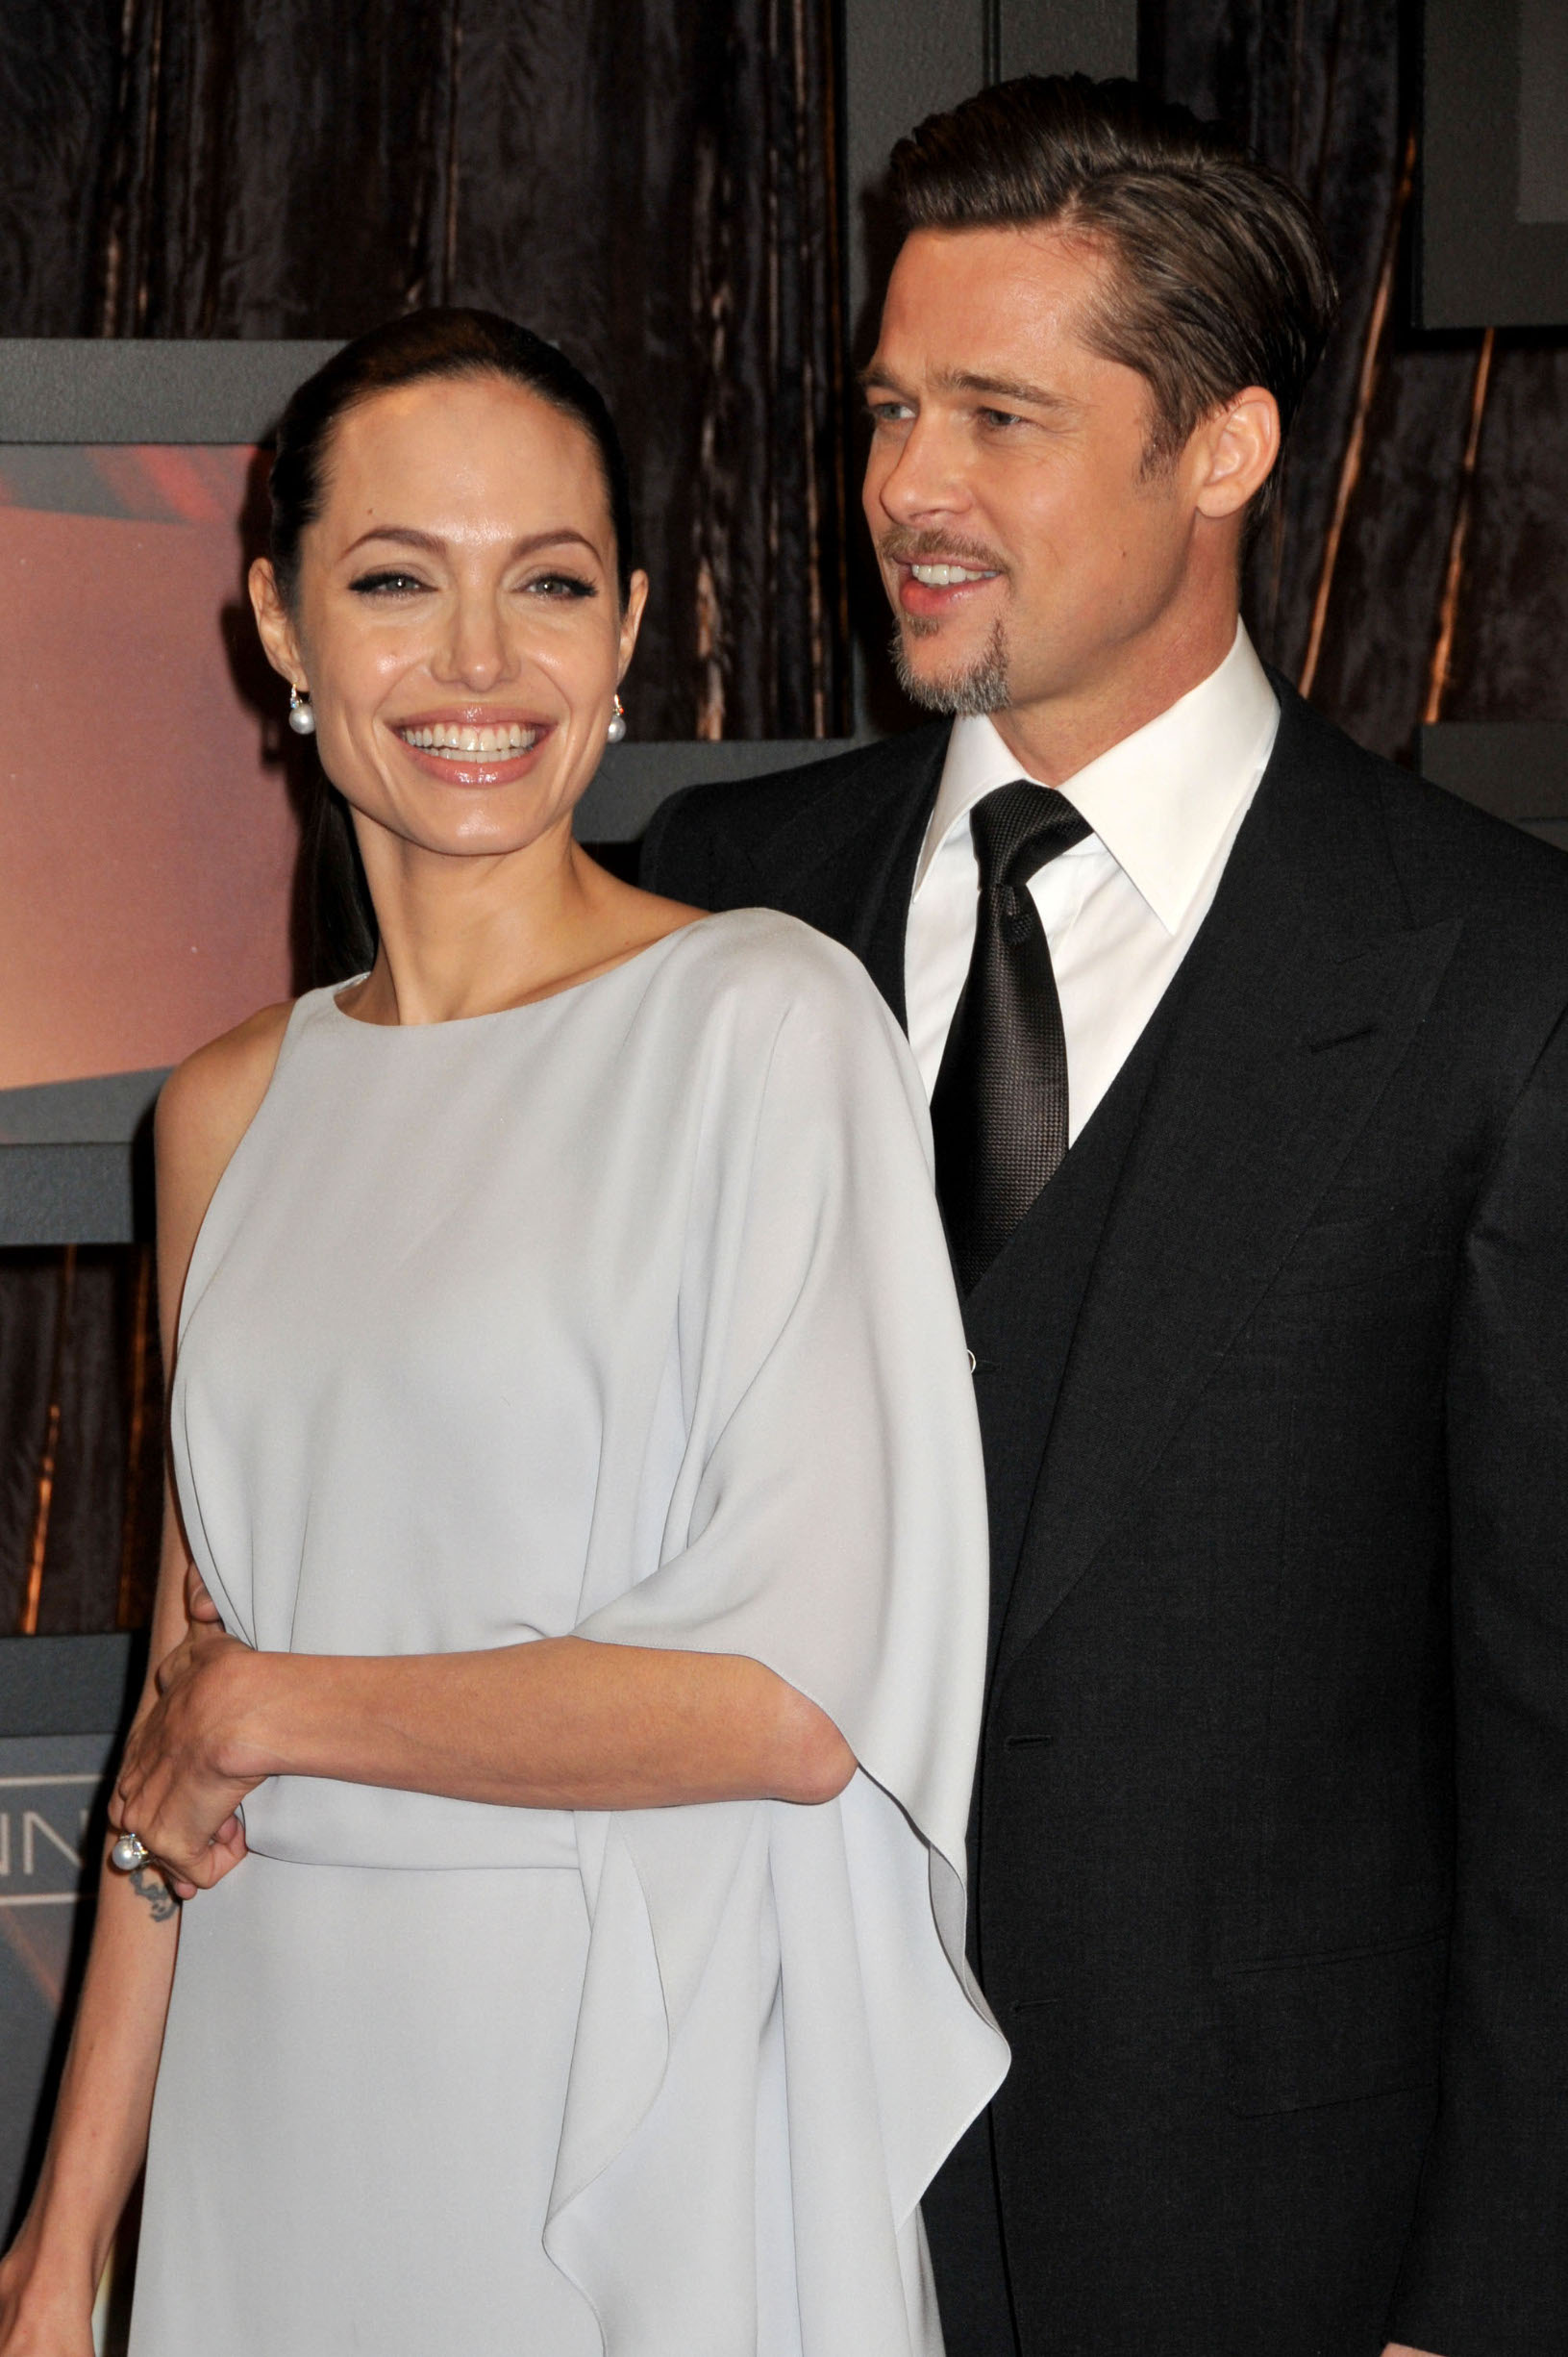 20 September 2016 - Los Angeles, CA - Angelina Jolie Pitt has filed for divorce from Brad Pitt. Jolie Pitt, 41, filed legal docs Monday citing irreconcilable differences. Jolie Pitt requested physical custody of the couple's shared six children Đ Maddox, Pax, Zahara, Shiloh, Vivienne, and Knox Đ asking for Pitt to be granted visitation, citing legal documents. File Photo: 08 January 2009 - Santa Monica, CA - Angelina Jolie and Brad Pitt. 14th Annual Critics Choice Awards at the Santa Monica Civic Auditorium.,Image: 300497953, License: Rights-managed, Restrictions: *** France OUT ***, Model Release: no, Credit line: Admedia, Inc / ddp USA / Profimedia